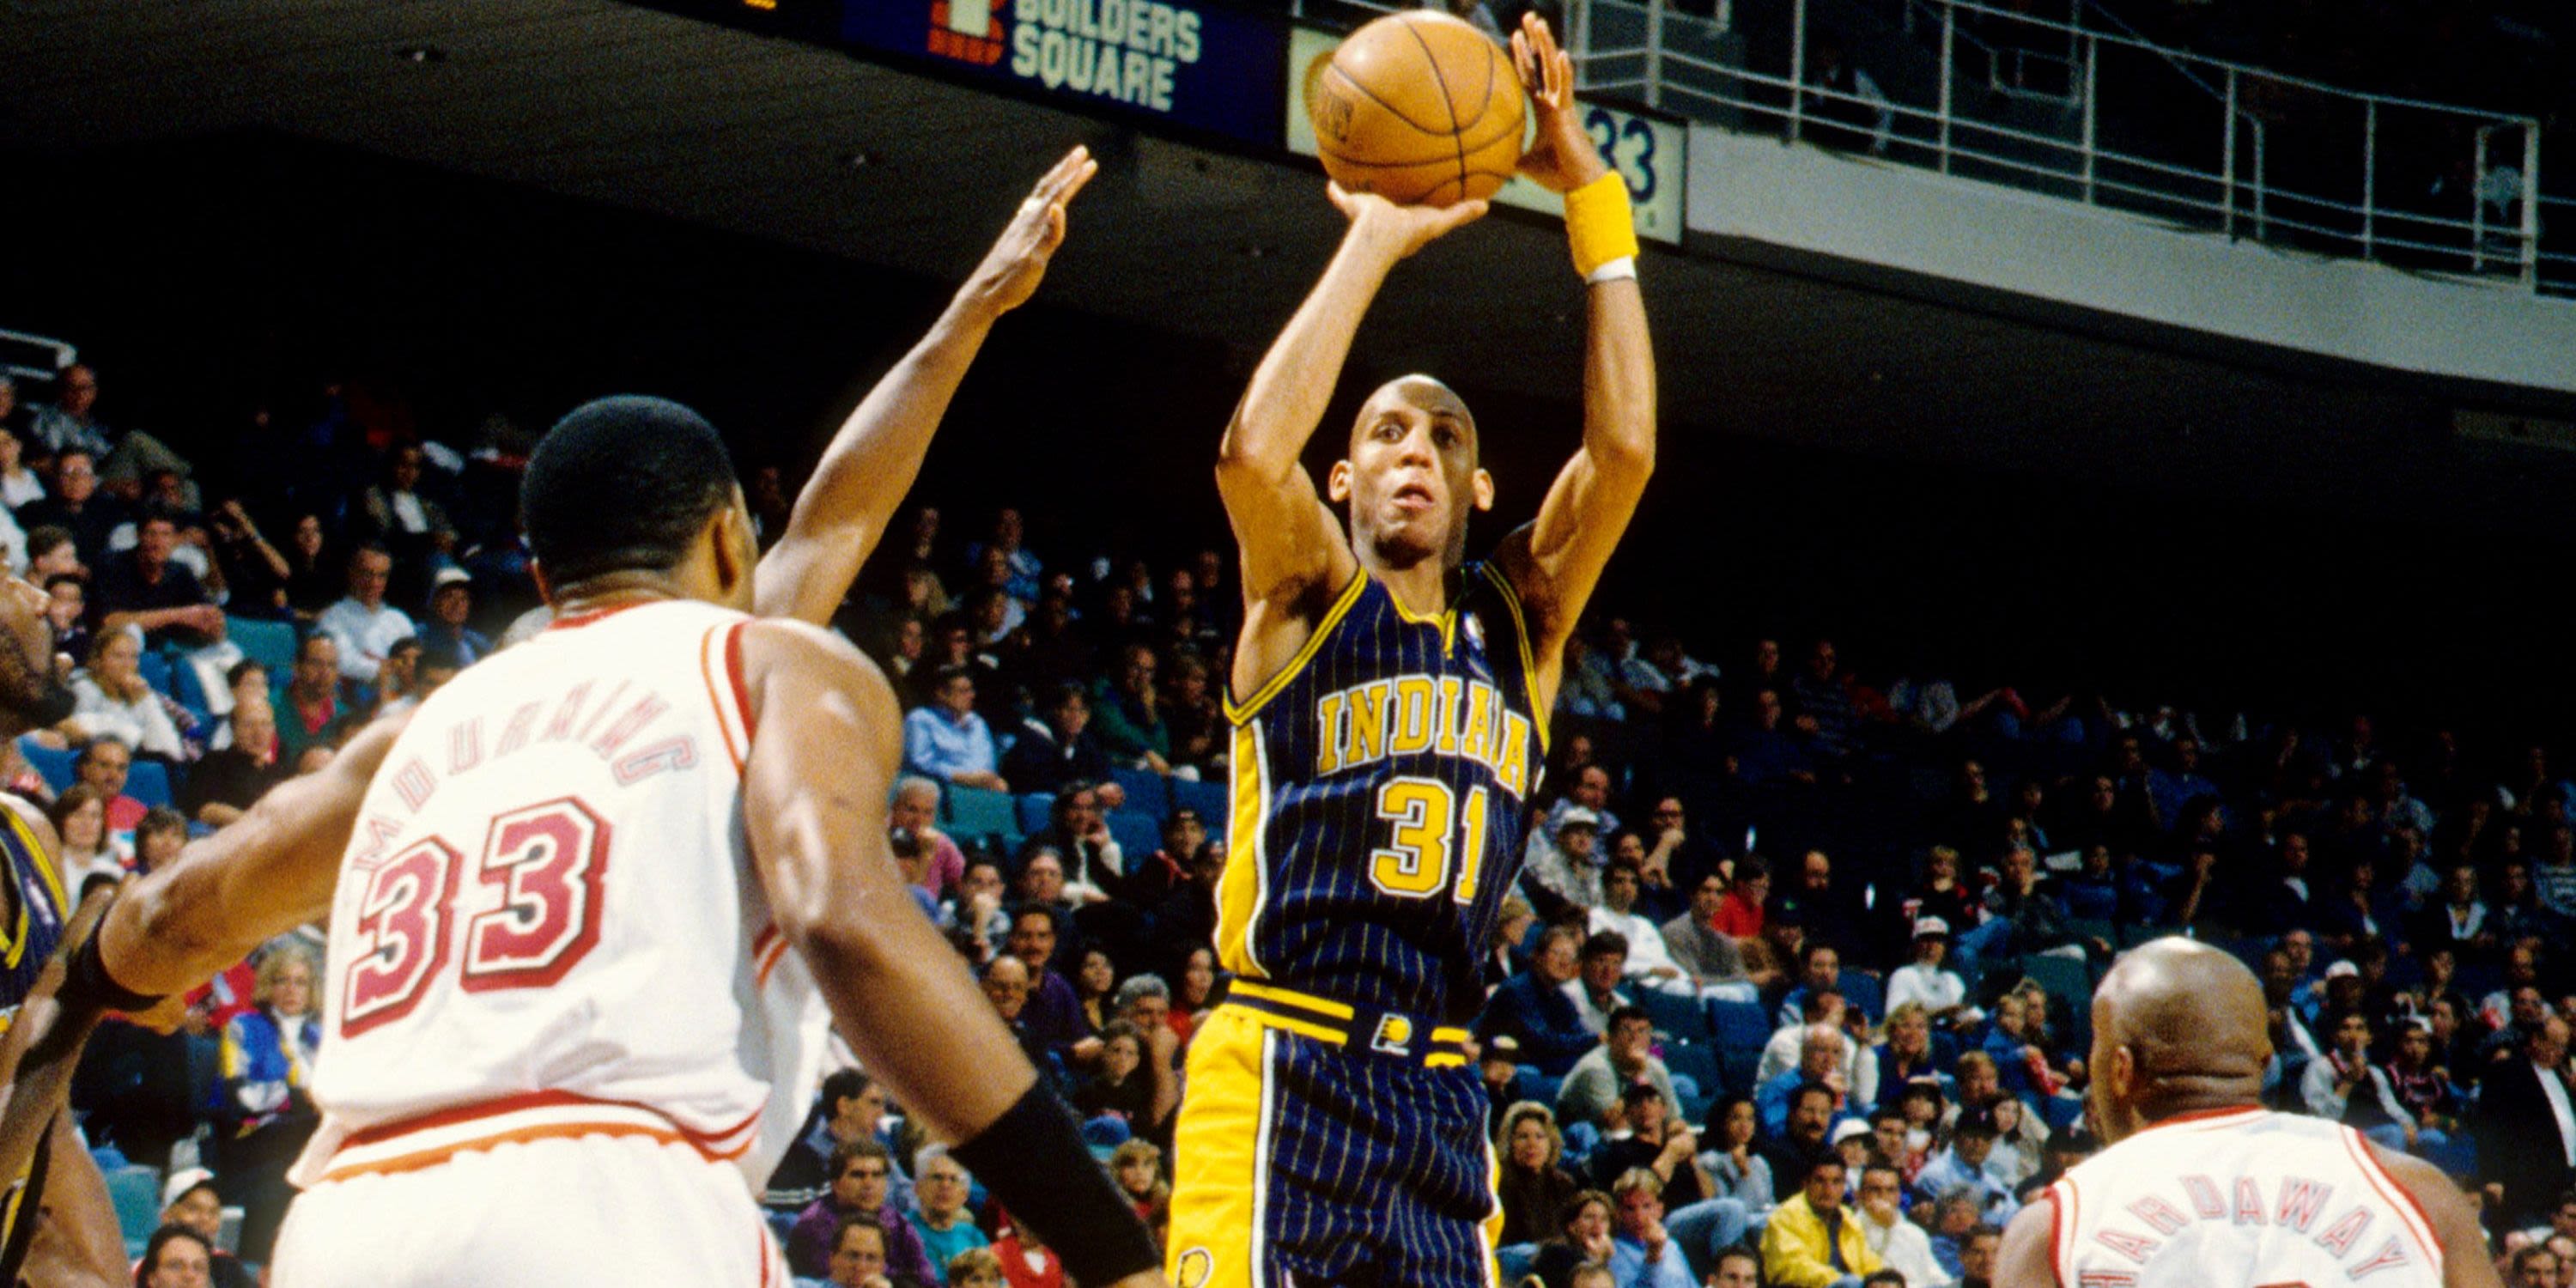 Reggie Miller Got Some Classic NYC Hate From Ben Stiller Before Knicks-Pacers Game